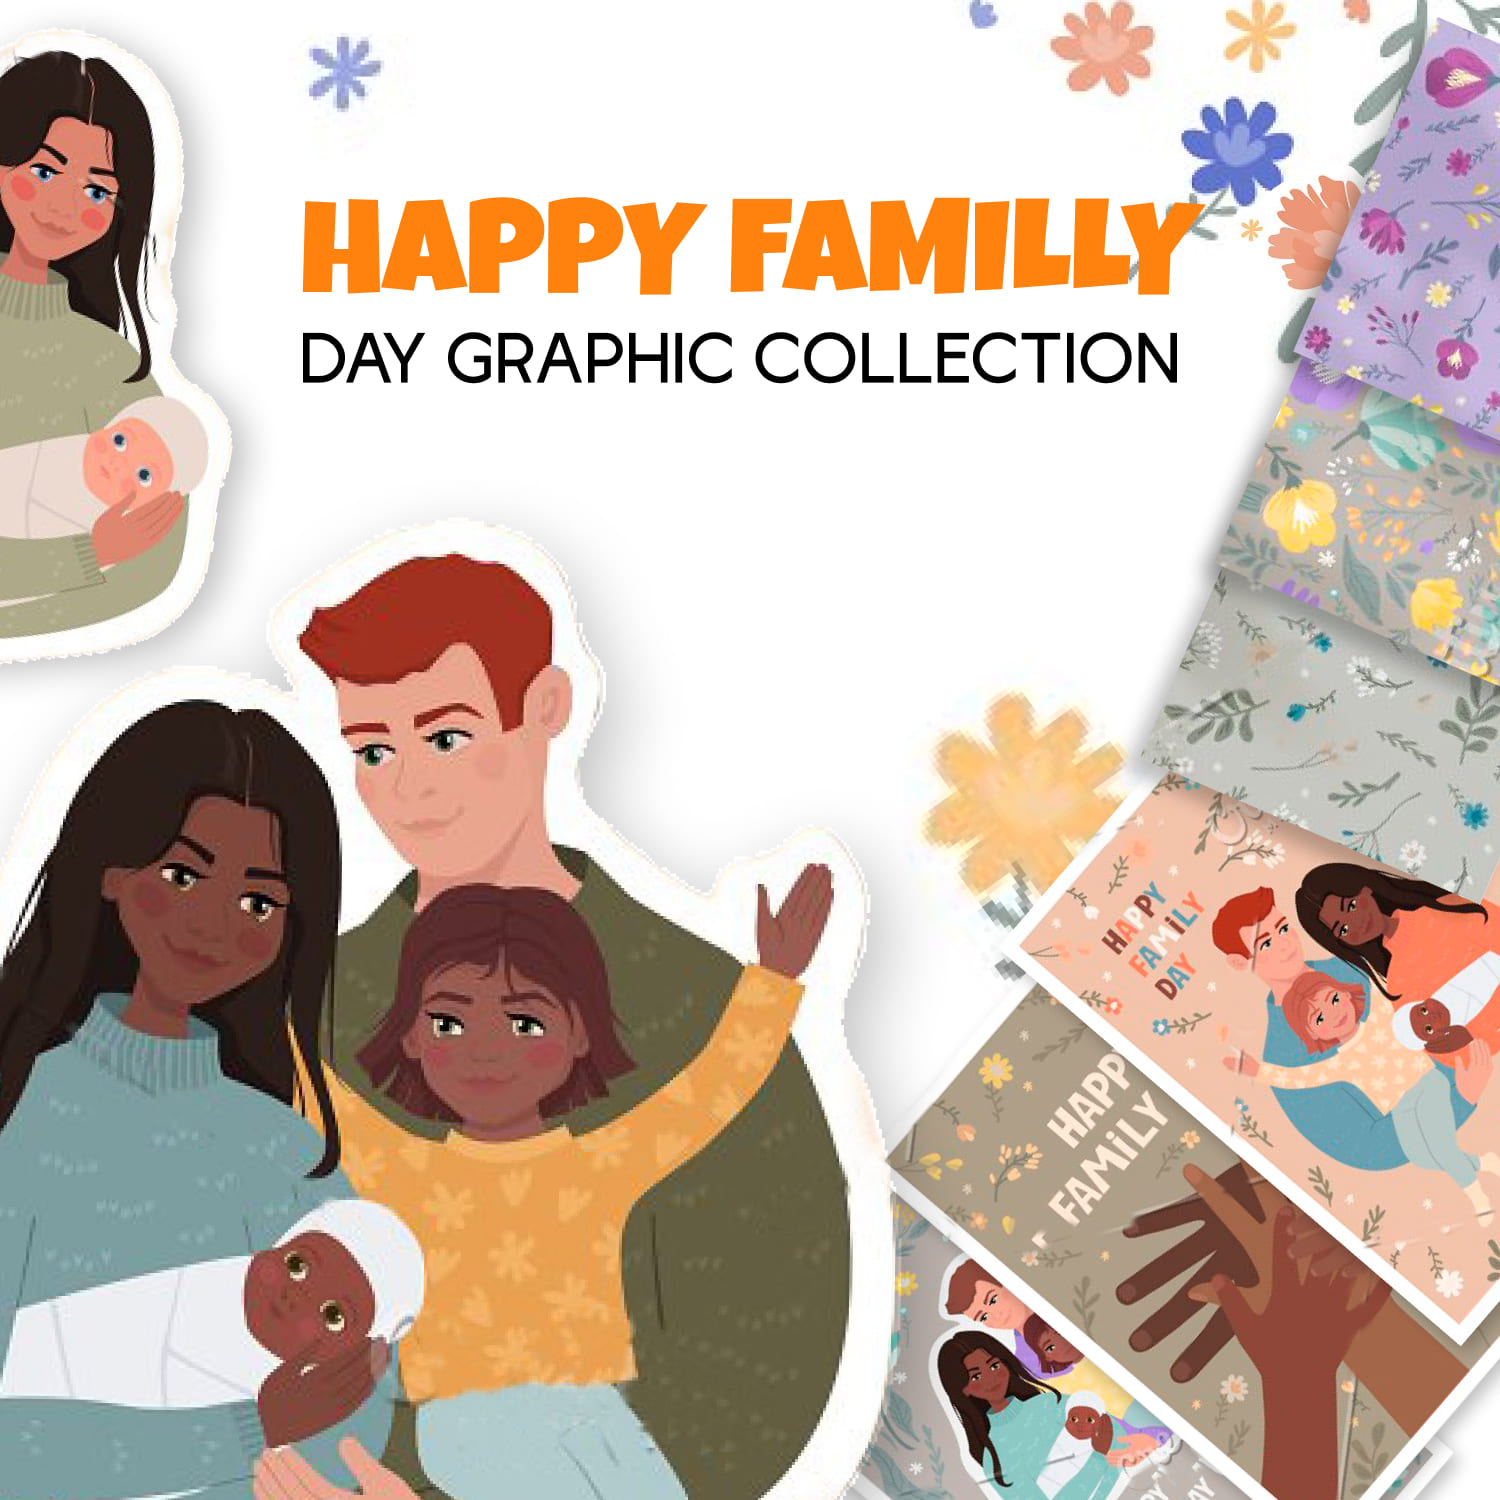 Happy Family Day Graphic Collection.